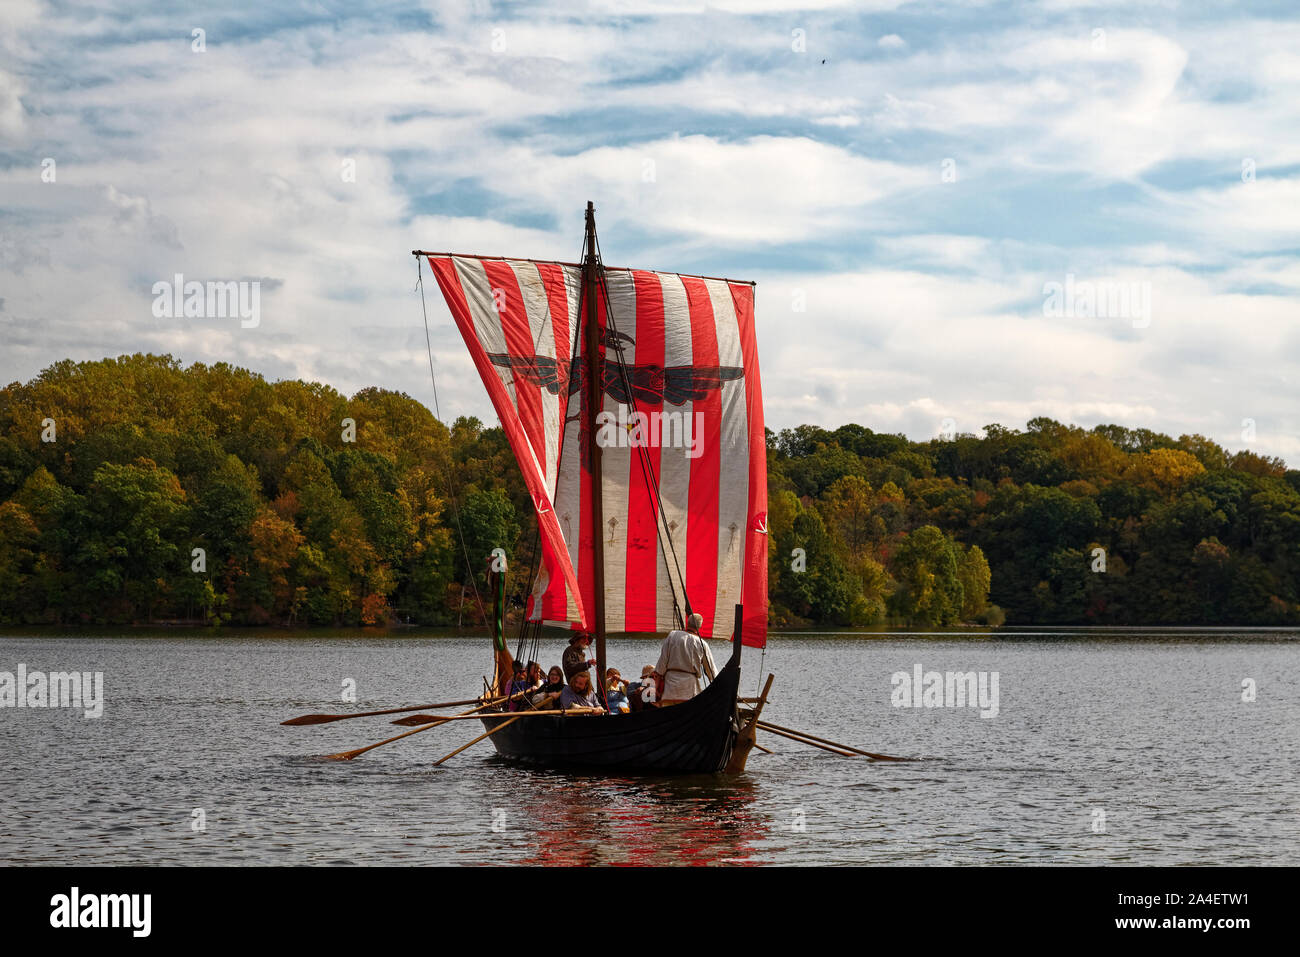 Viking ship replica; people rowing; costumed, men, women, long oars; red and white striped sail; wood boat; Marsh Creek State Park; Downingtown; PA; P Stock Photo